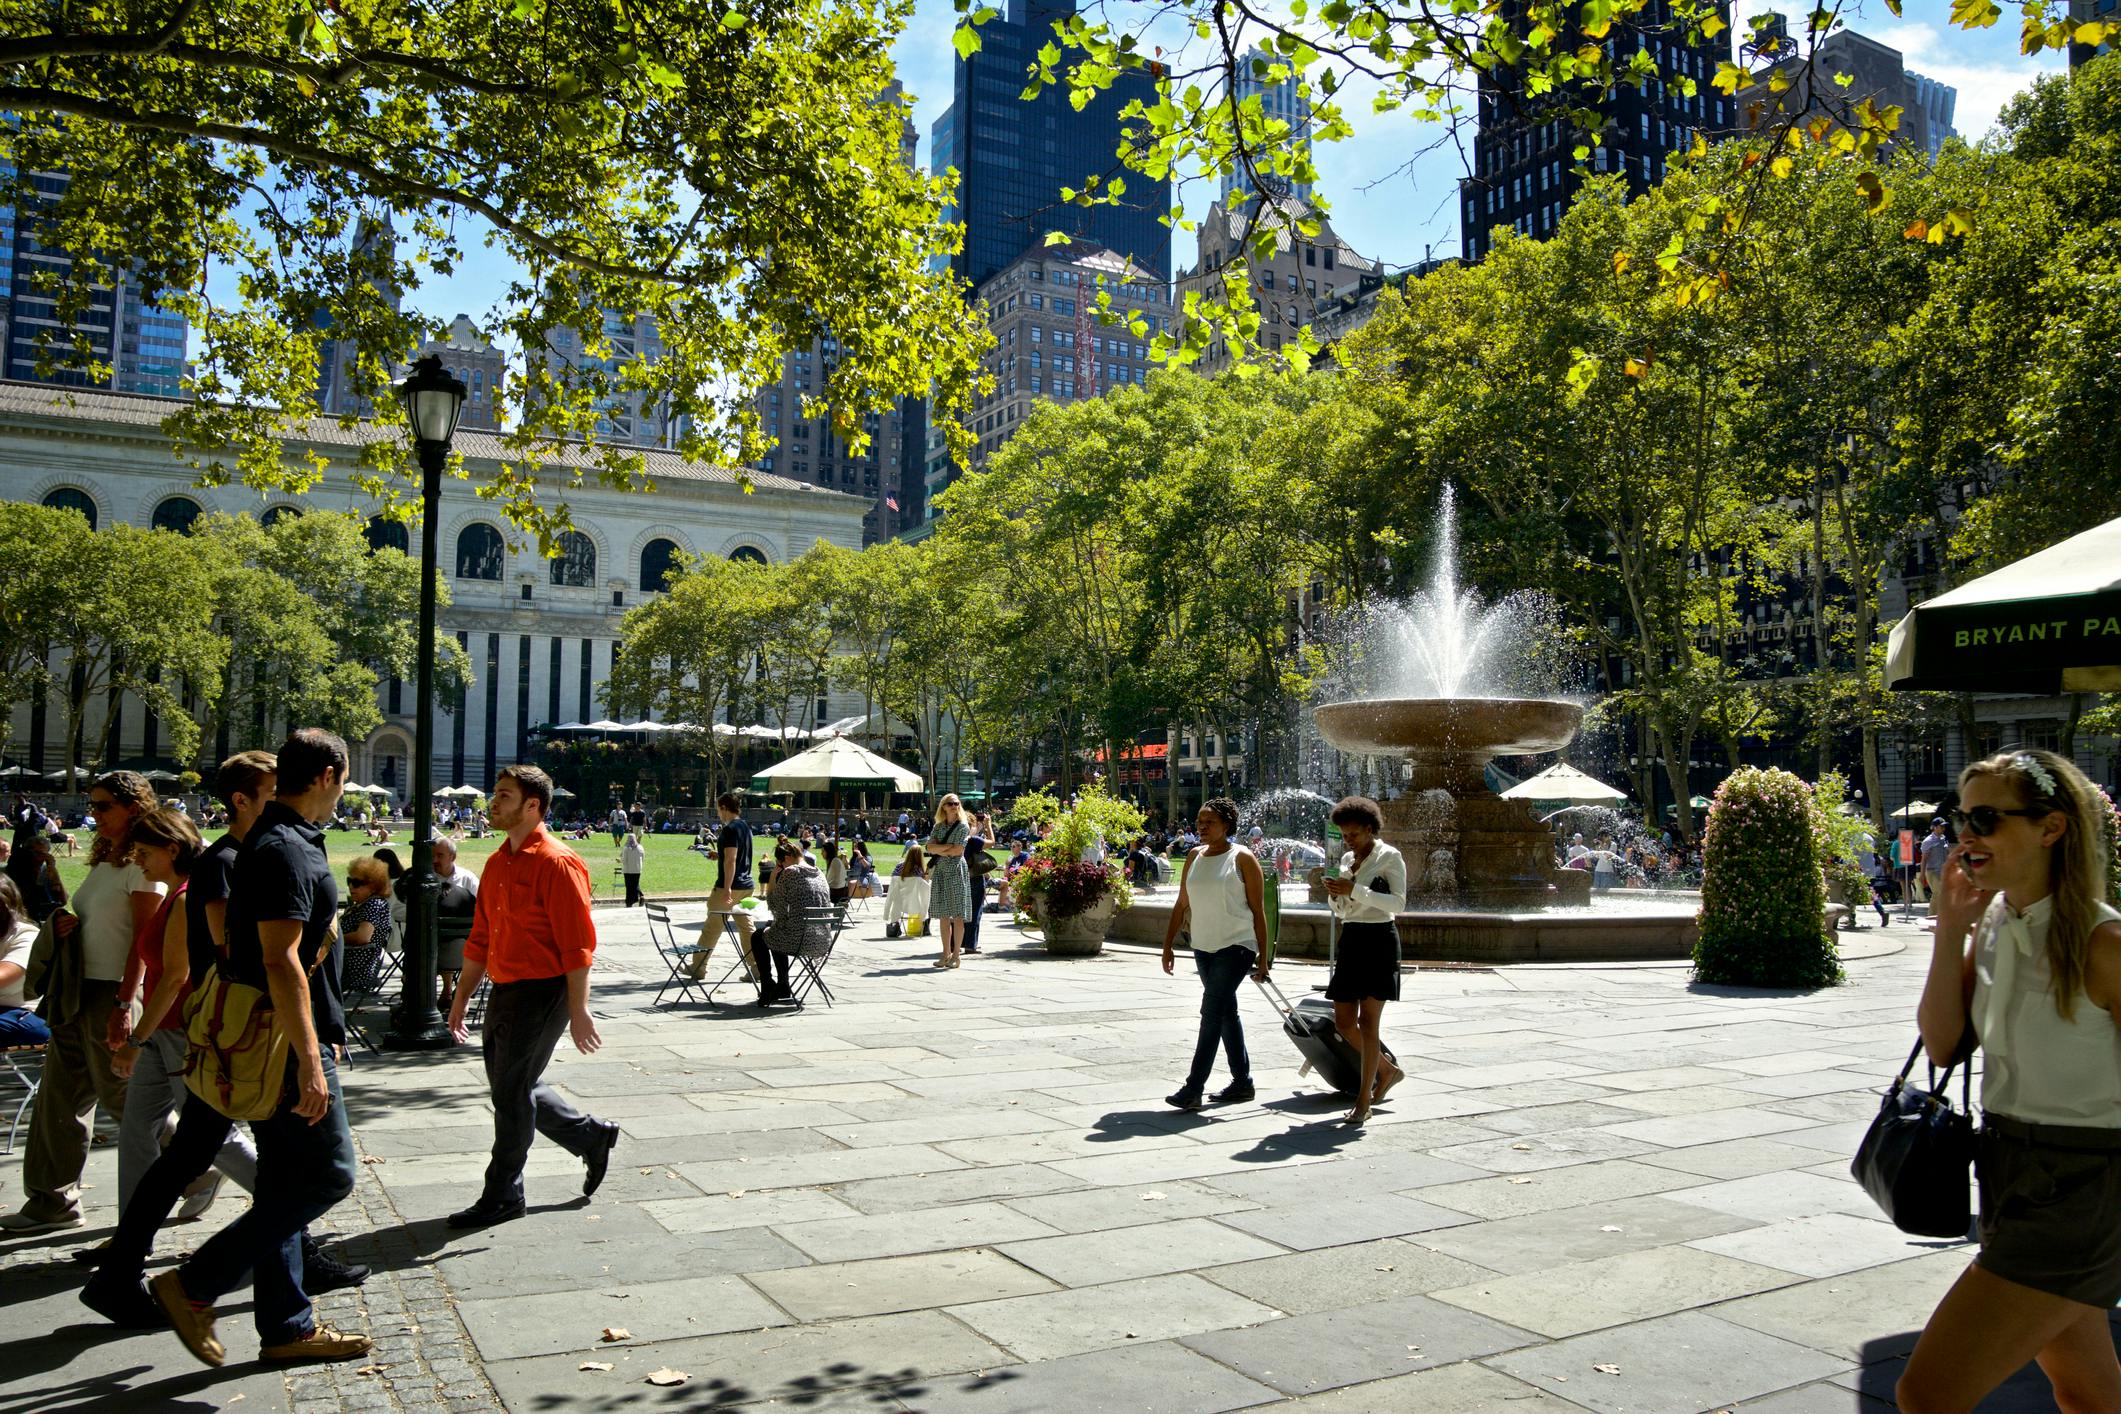 Bryant Park, New York City, 2015. Photo by JayLazarin/Getty Images.